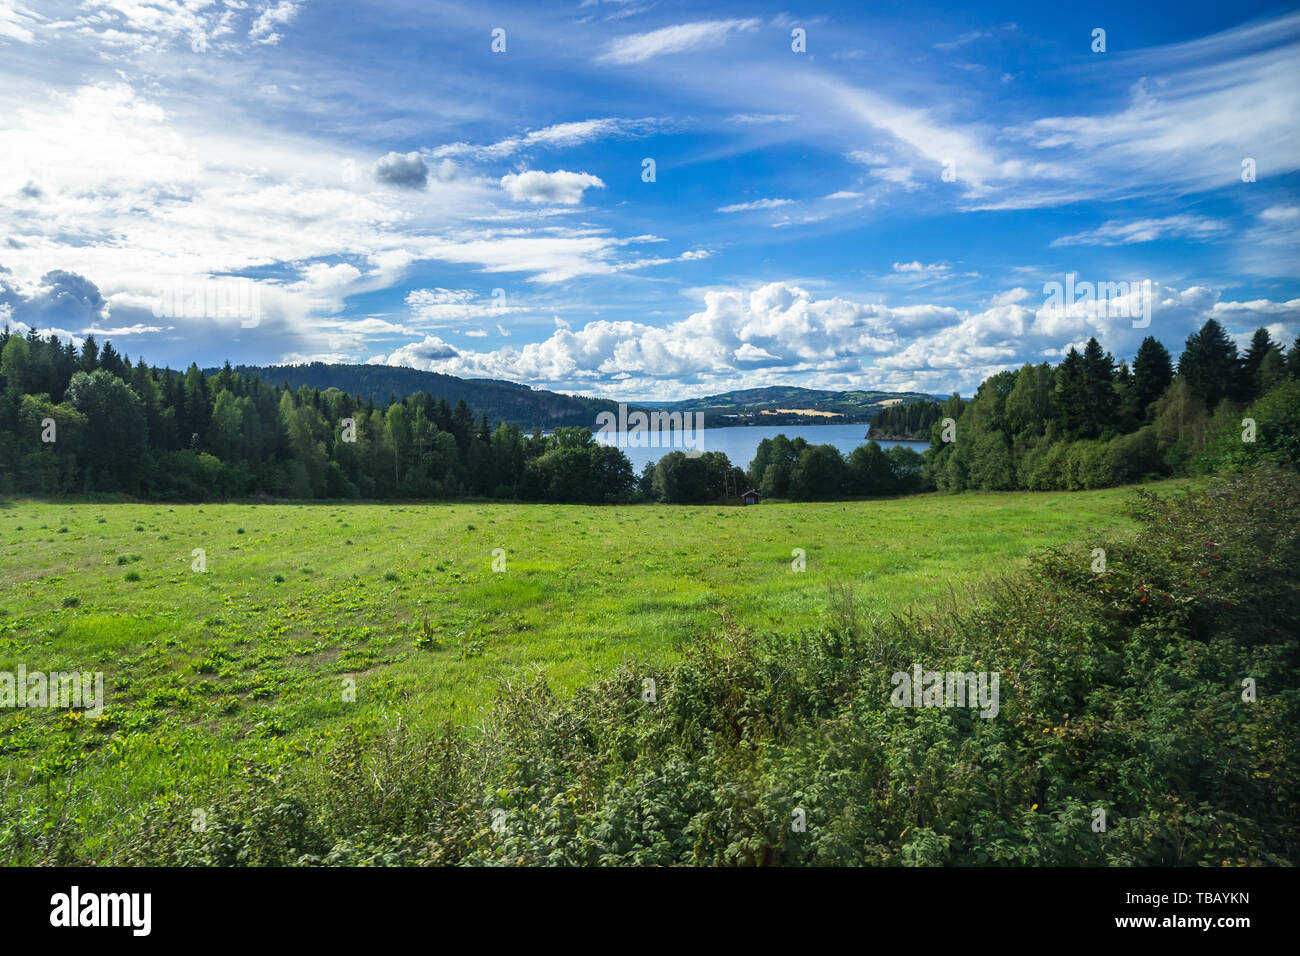 Norwegian landscape in Hedmark county during summer near Mjosa lake, viewed from the scenic railway connecting Oslo to Trondheim Stock Photo